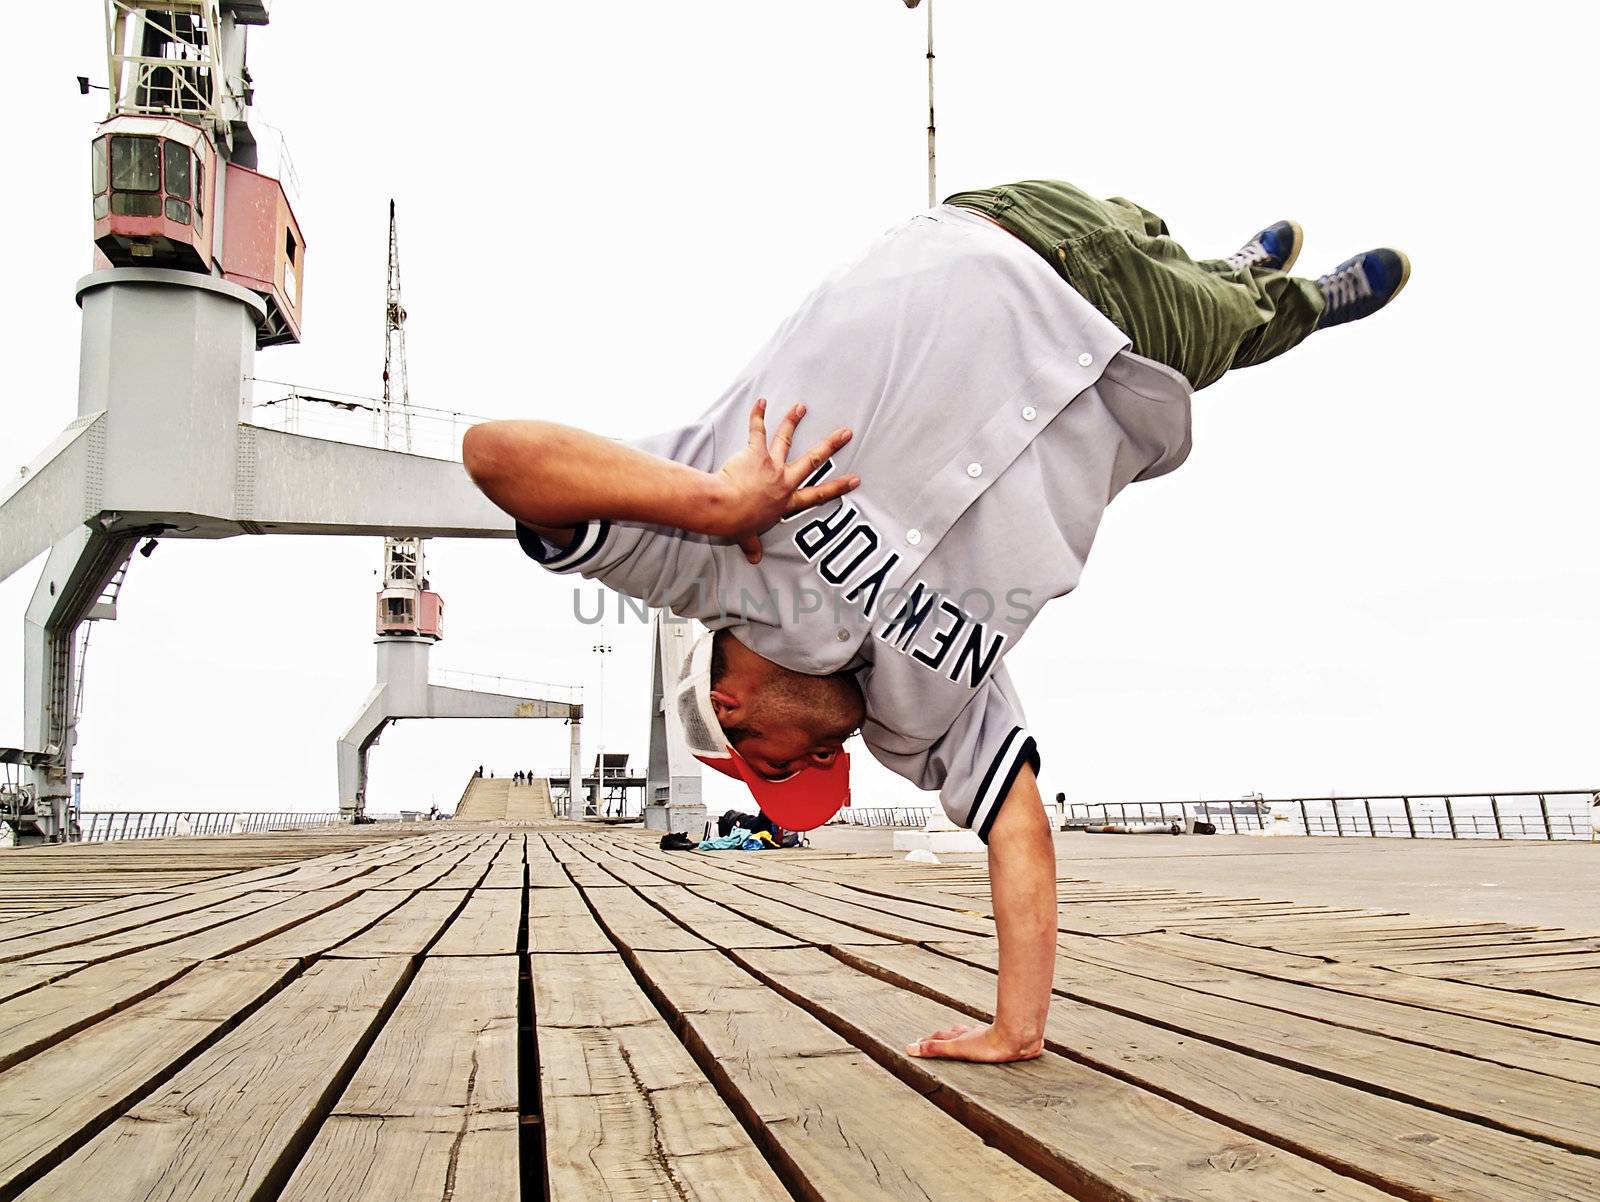 Breakdancer jumping by fxegs